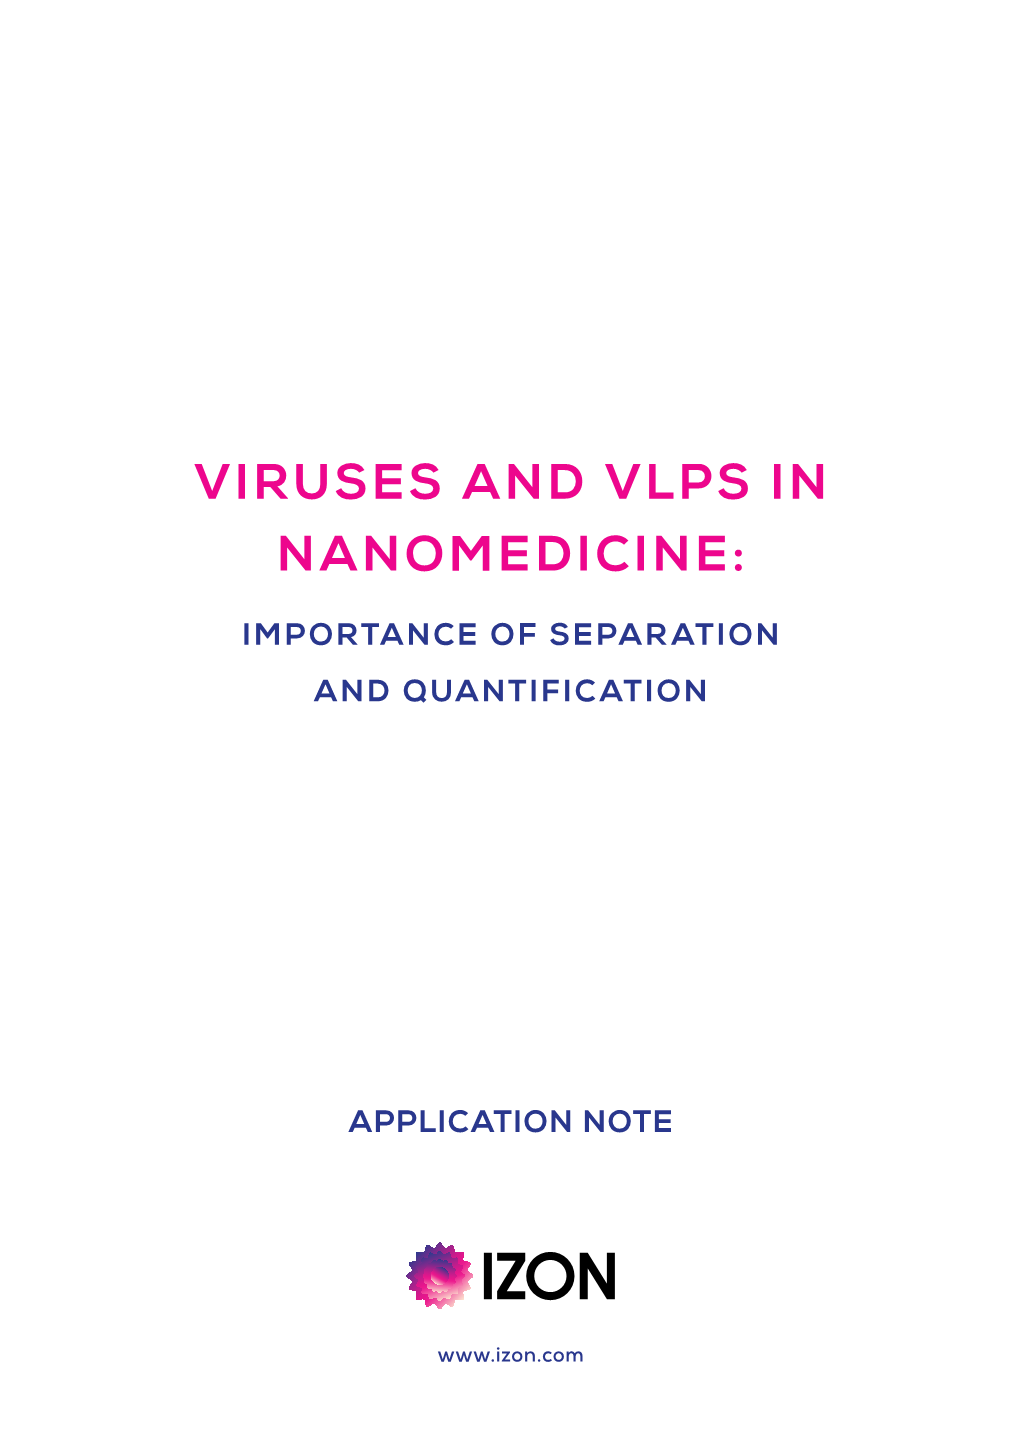 Viruses and Vlps in Nanomedicine: Importance of Separation And